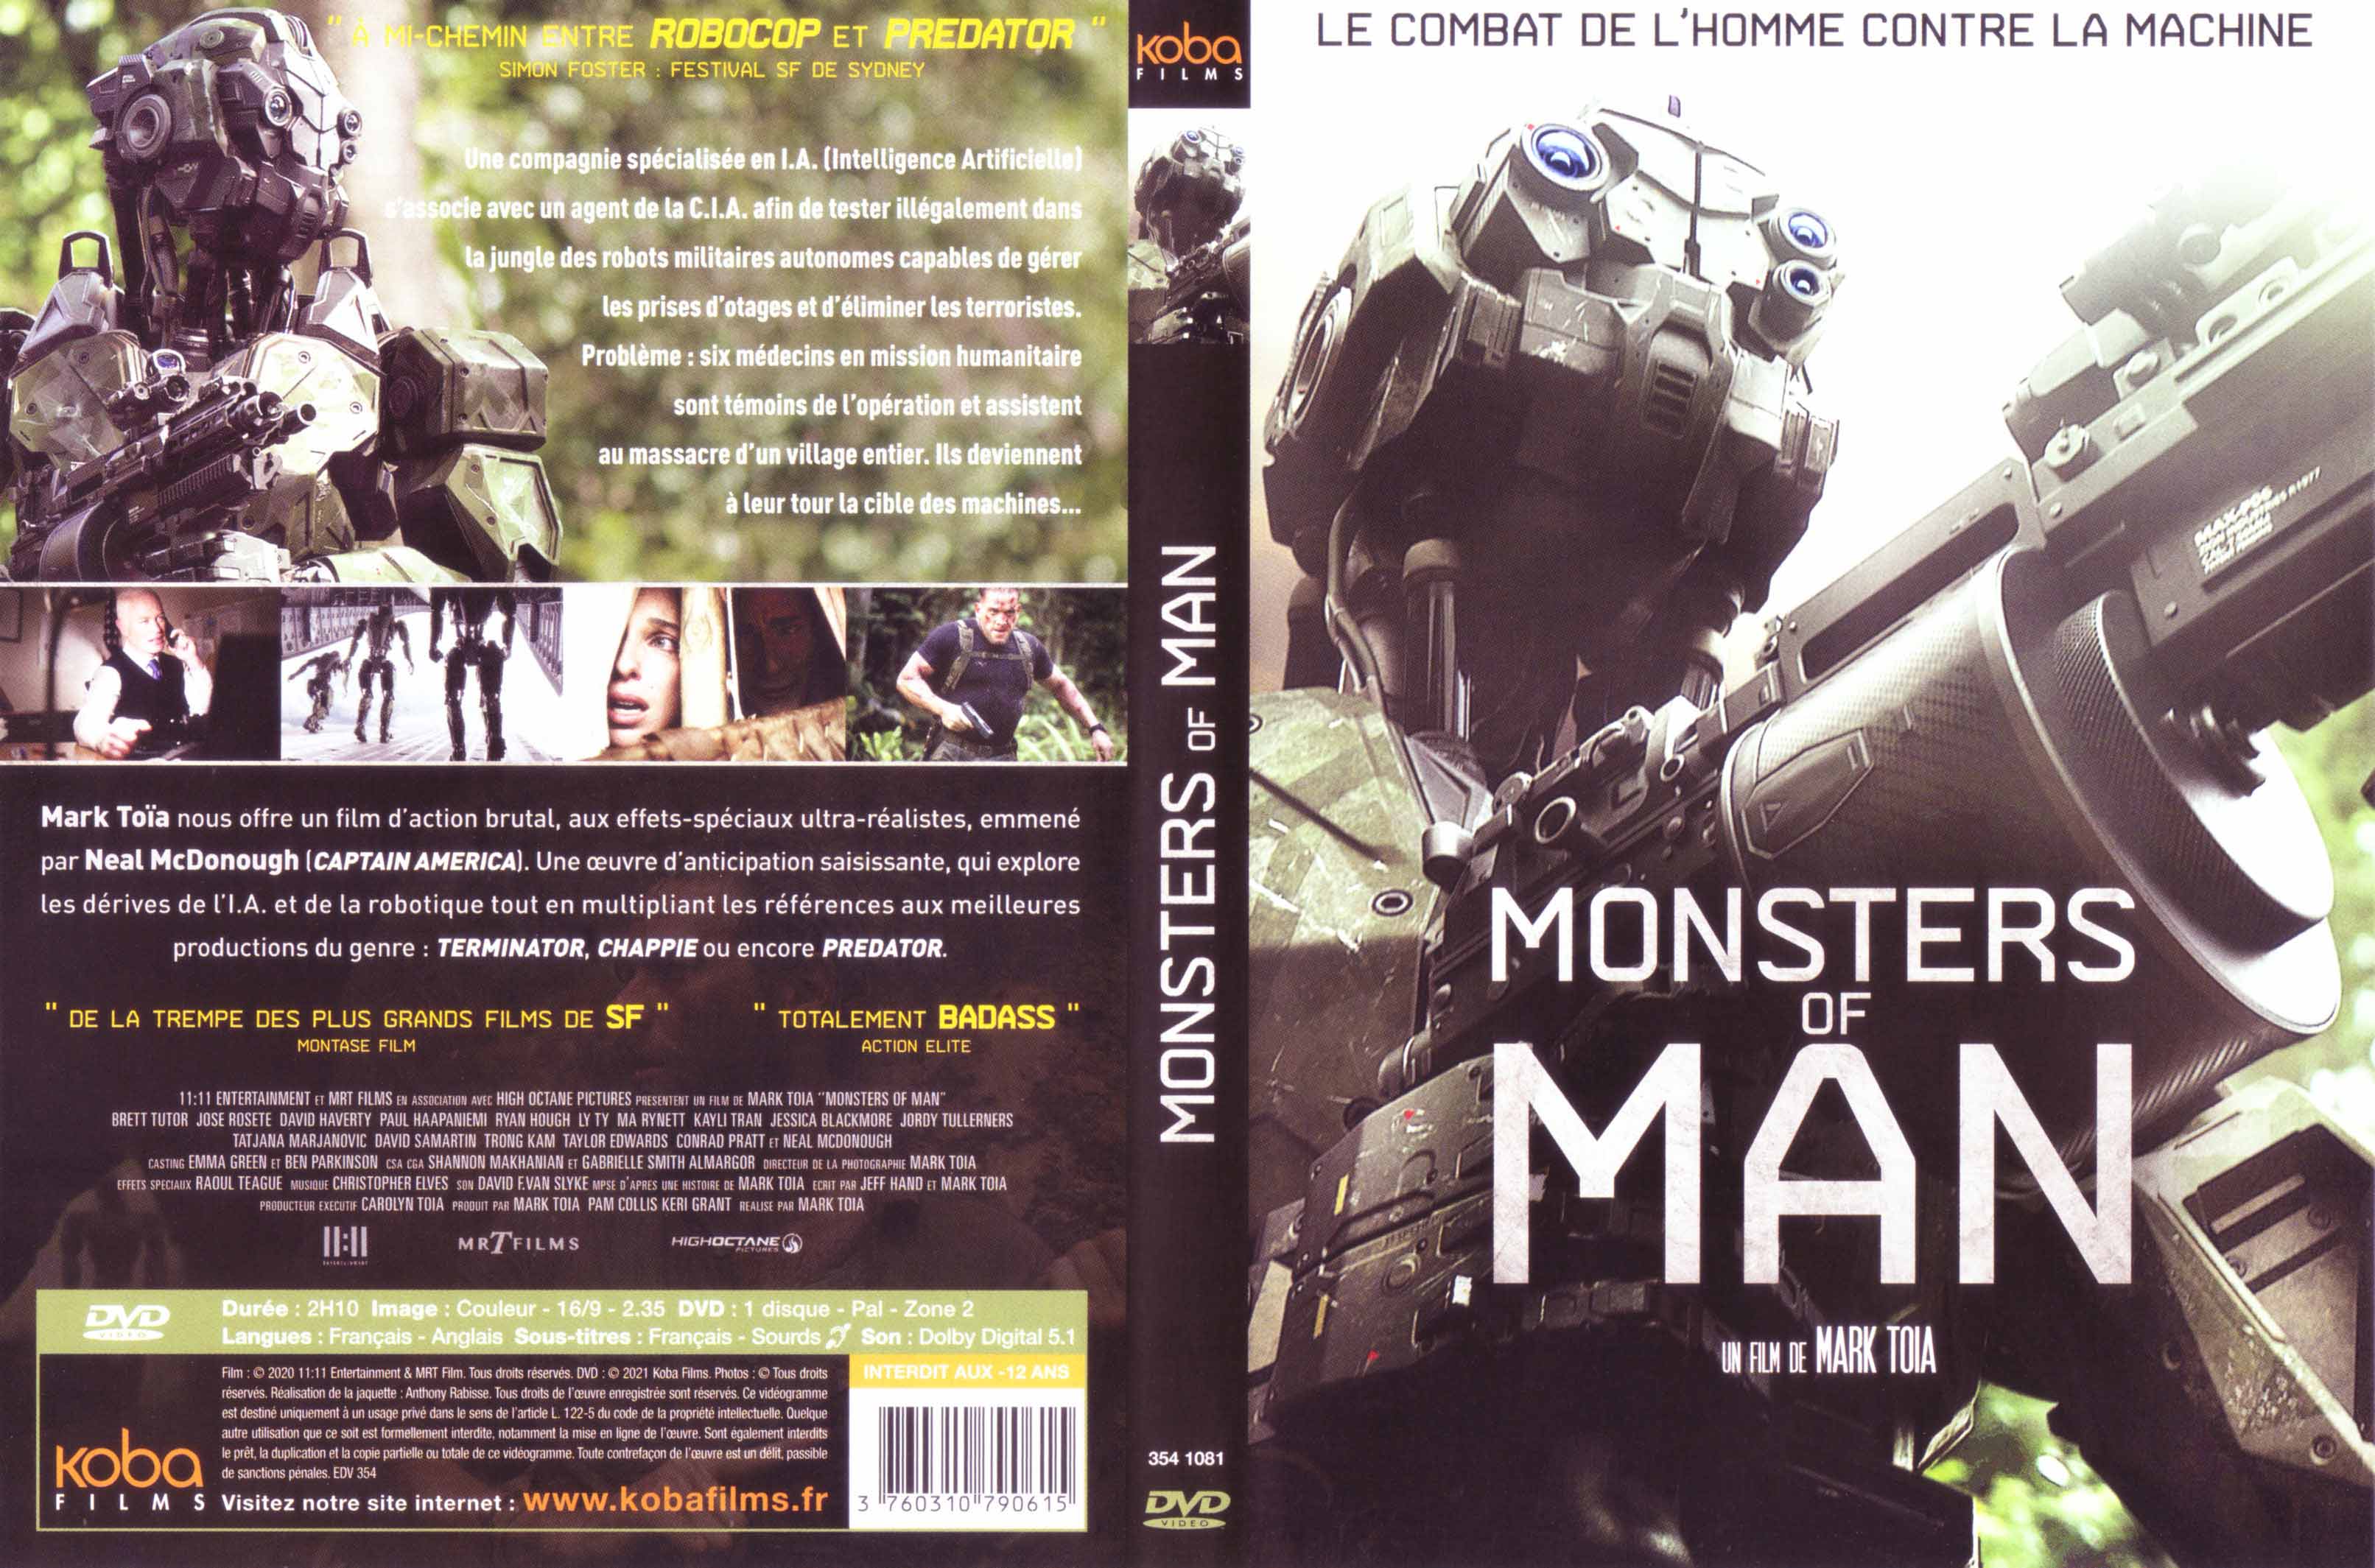 Jaquette DVD Monsters of man